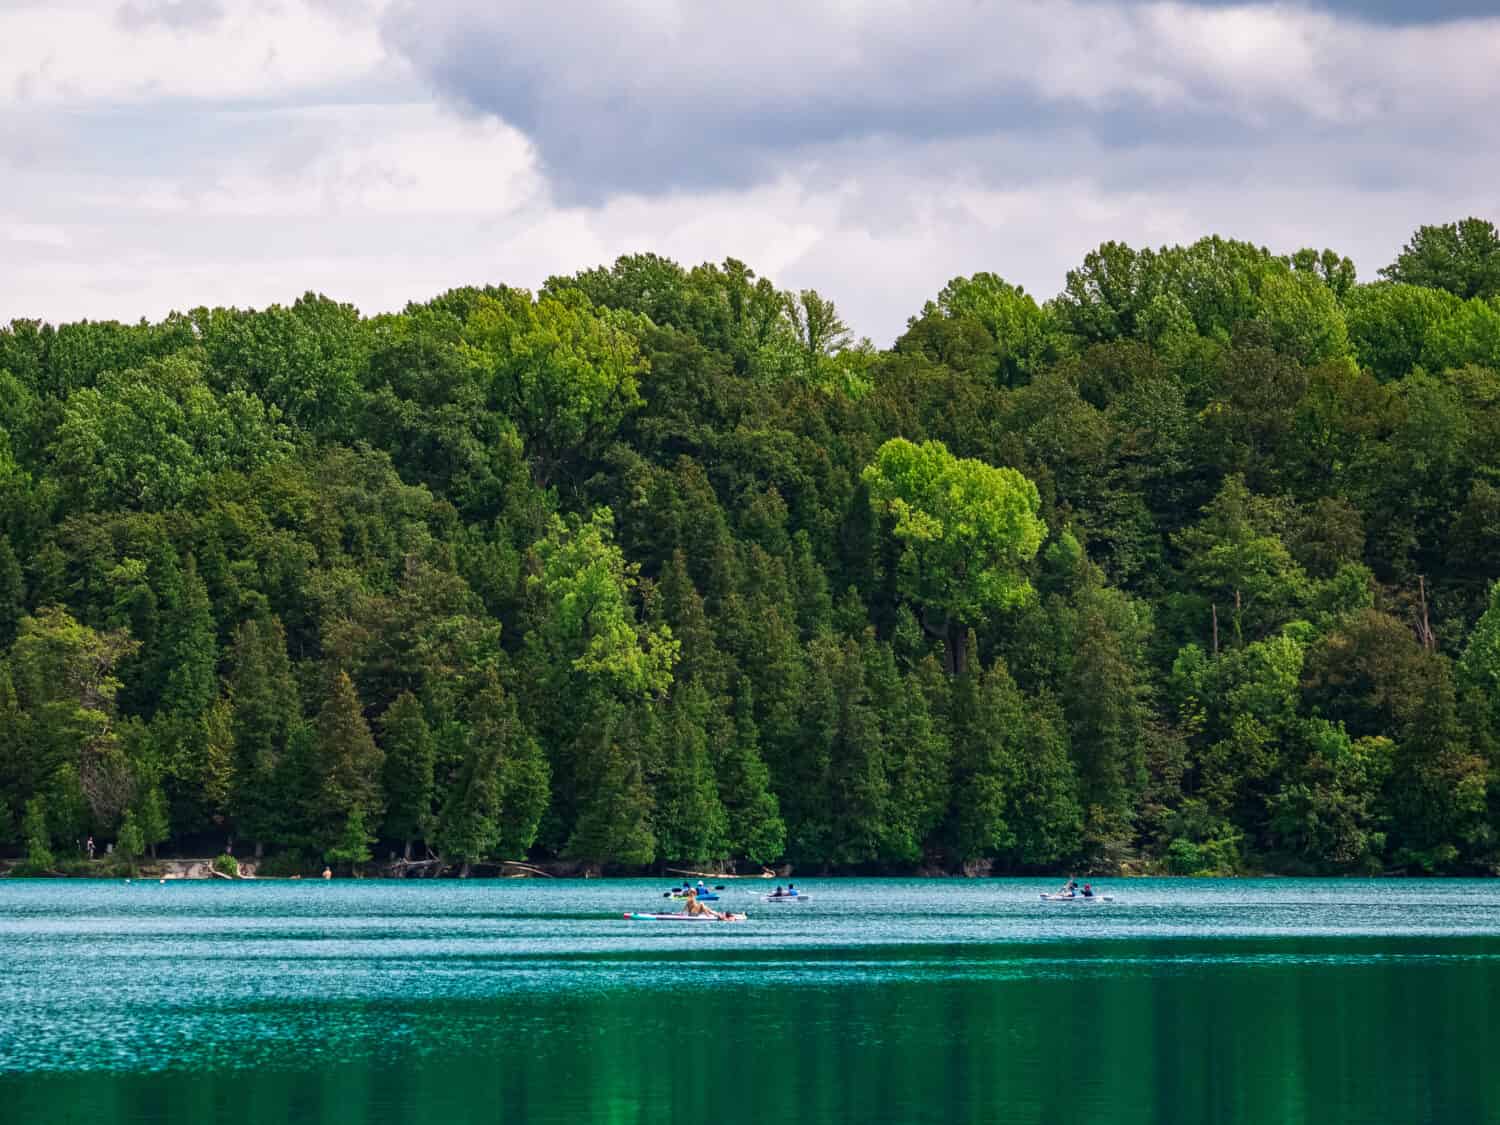 Landscape shot of green lakes state park in Fayetteville New York